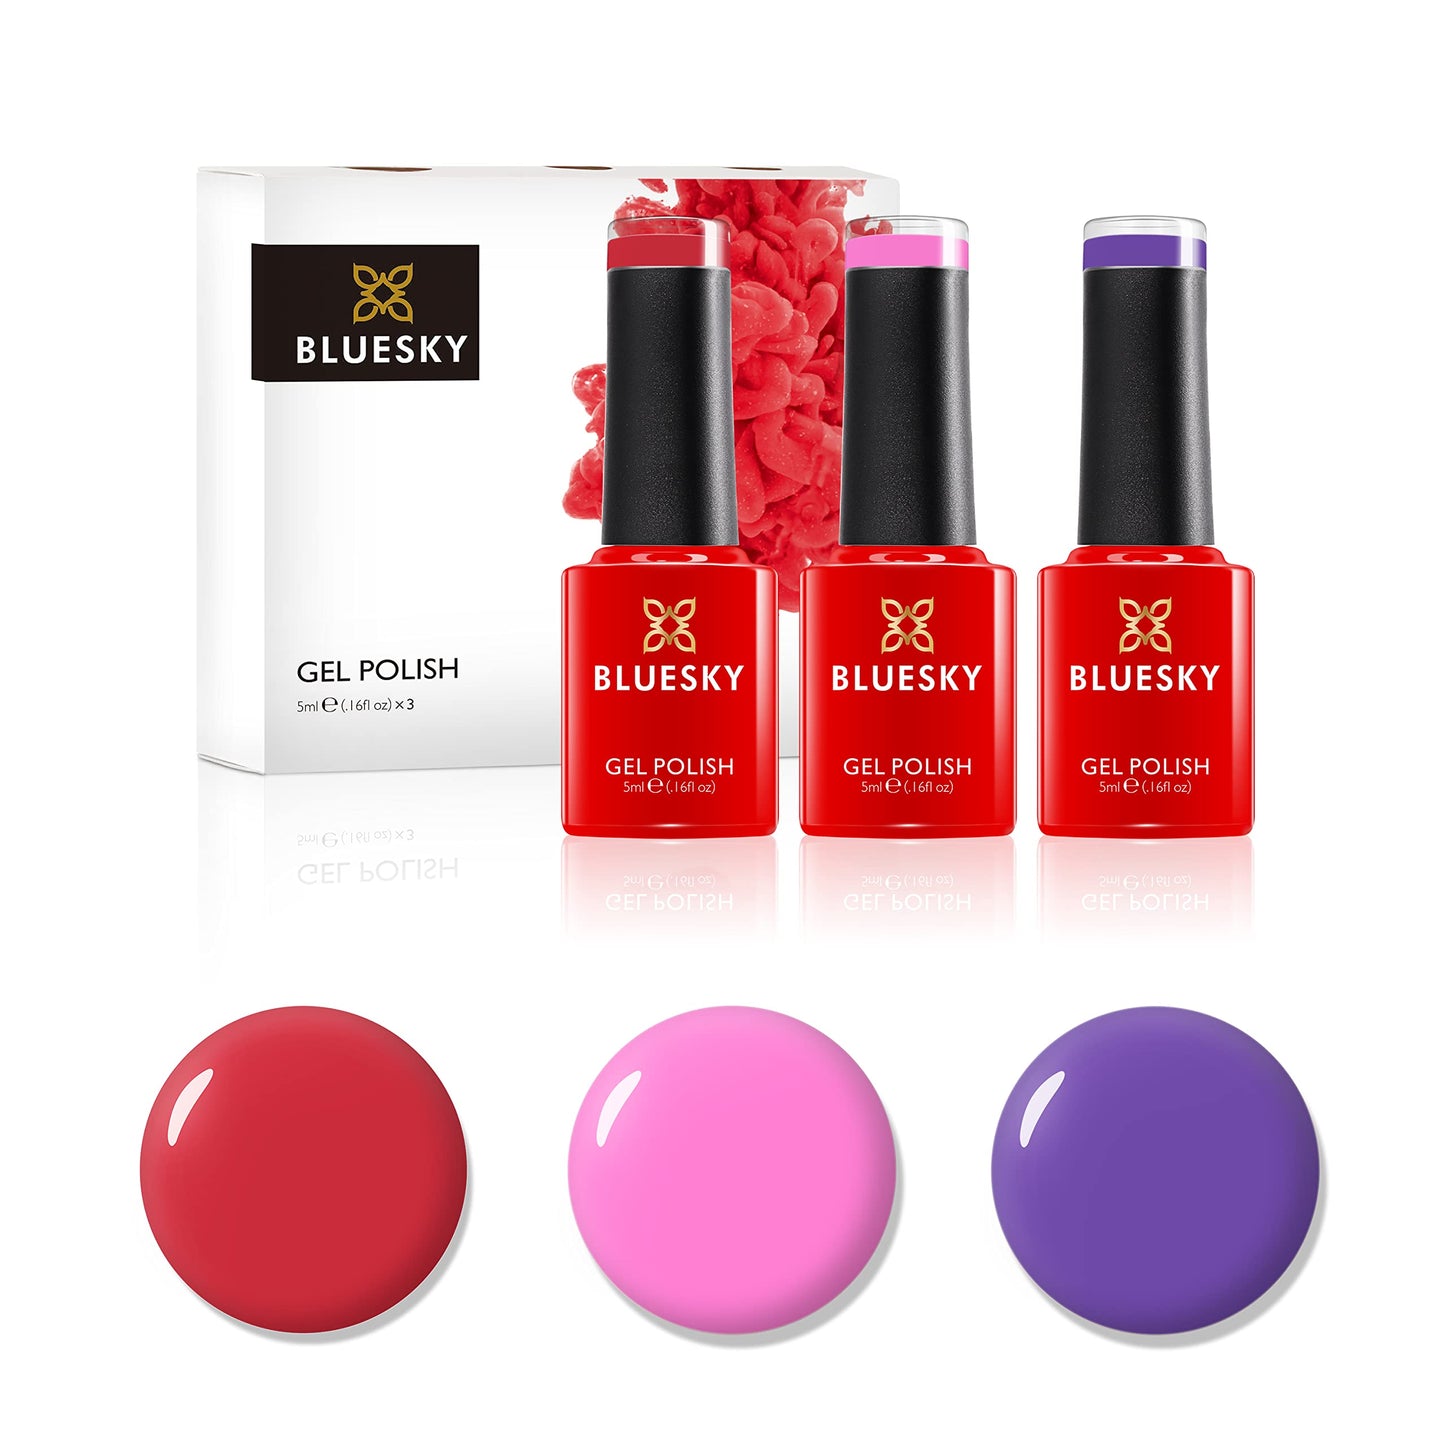 Bluesky Gel Nail Polish Set, 10 Year Anniversary Collection, Set 1, 3 x 5 ml, Pink, Purple, Red (Requires Curing Under UV or LED Lamp)